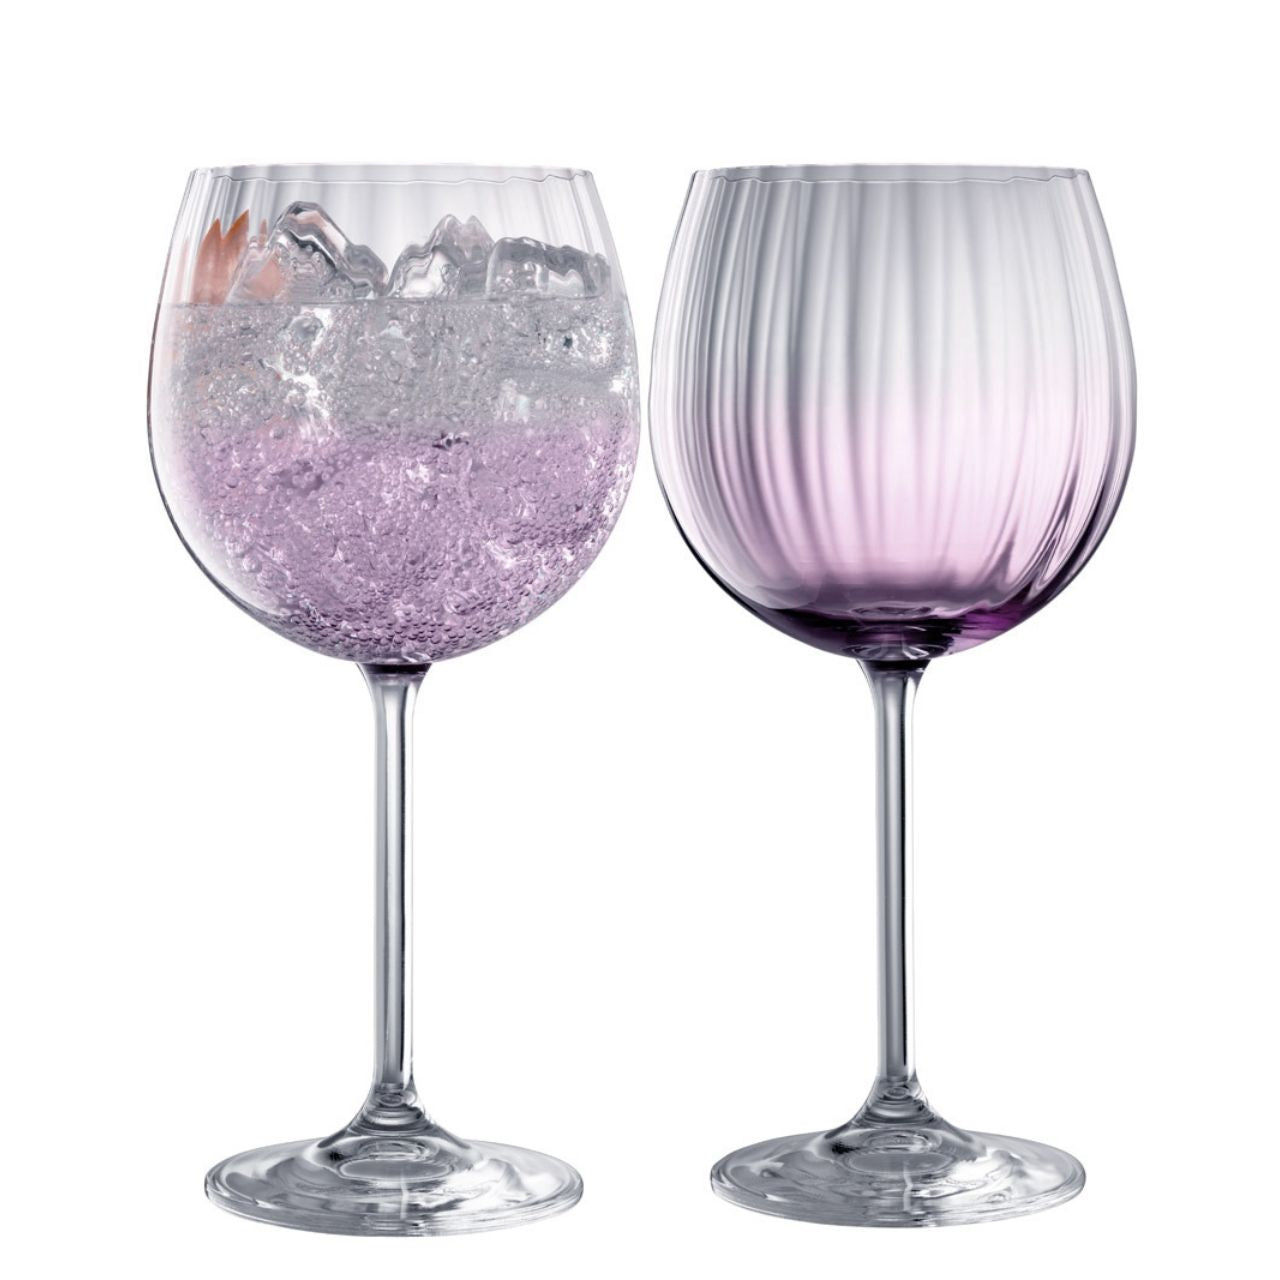 Galway Crystal Erne Gin & Tonic Pair Amethyst  Amethyst colour Gin and Tonic glasses in the Erne suite. Beautiful large balloon gin glasses with elegant lines design in an Amethyst colour. The glass has been designed to add a splash of colour and light design to a stunning gin glass. Ideal for everyday use or as a gift. Another addition to our beautiful Amethyst glassware suite.